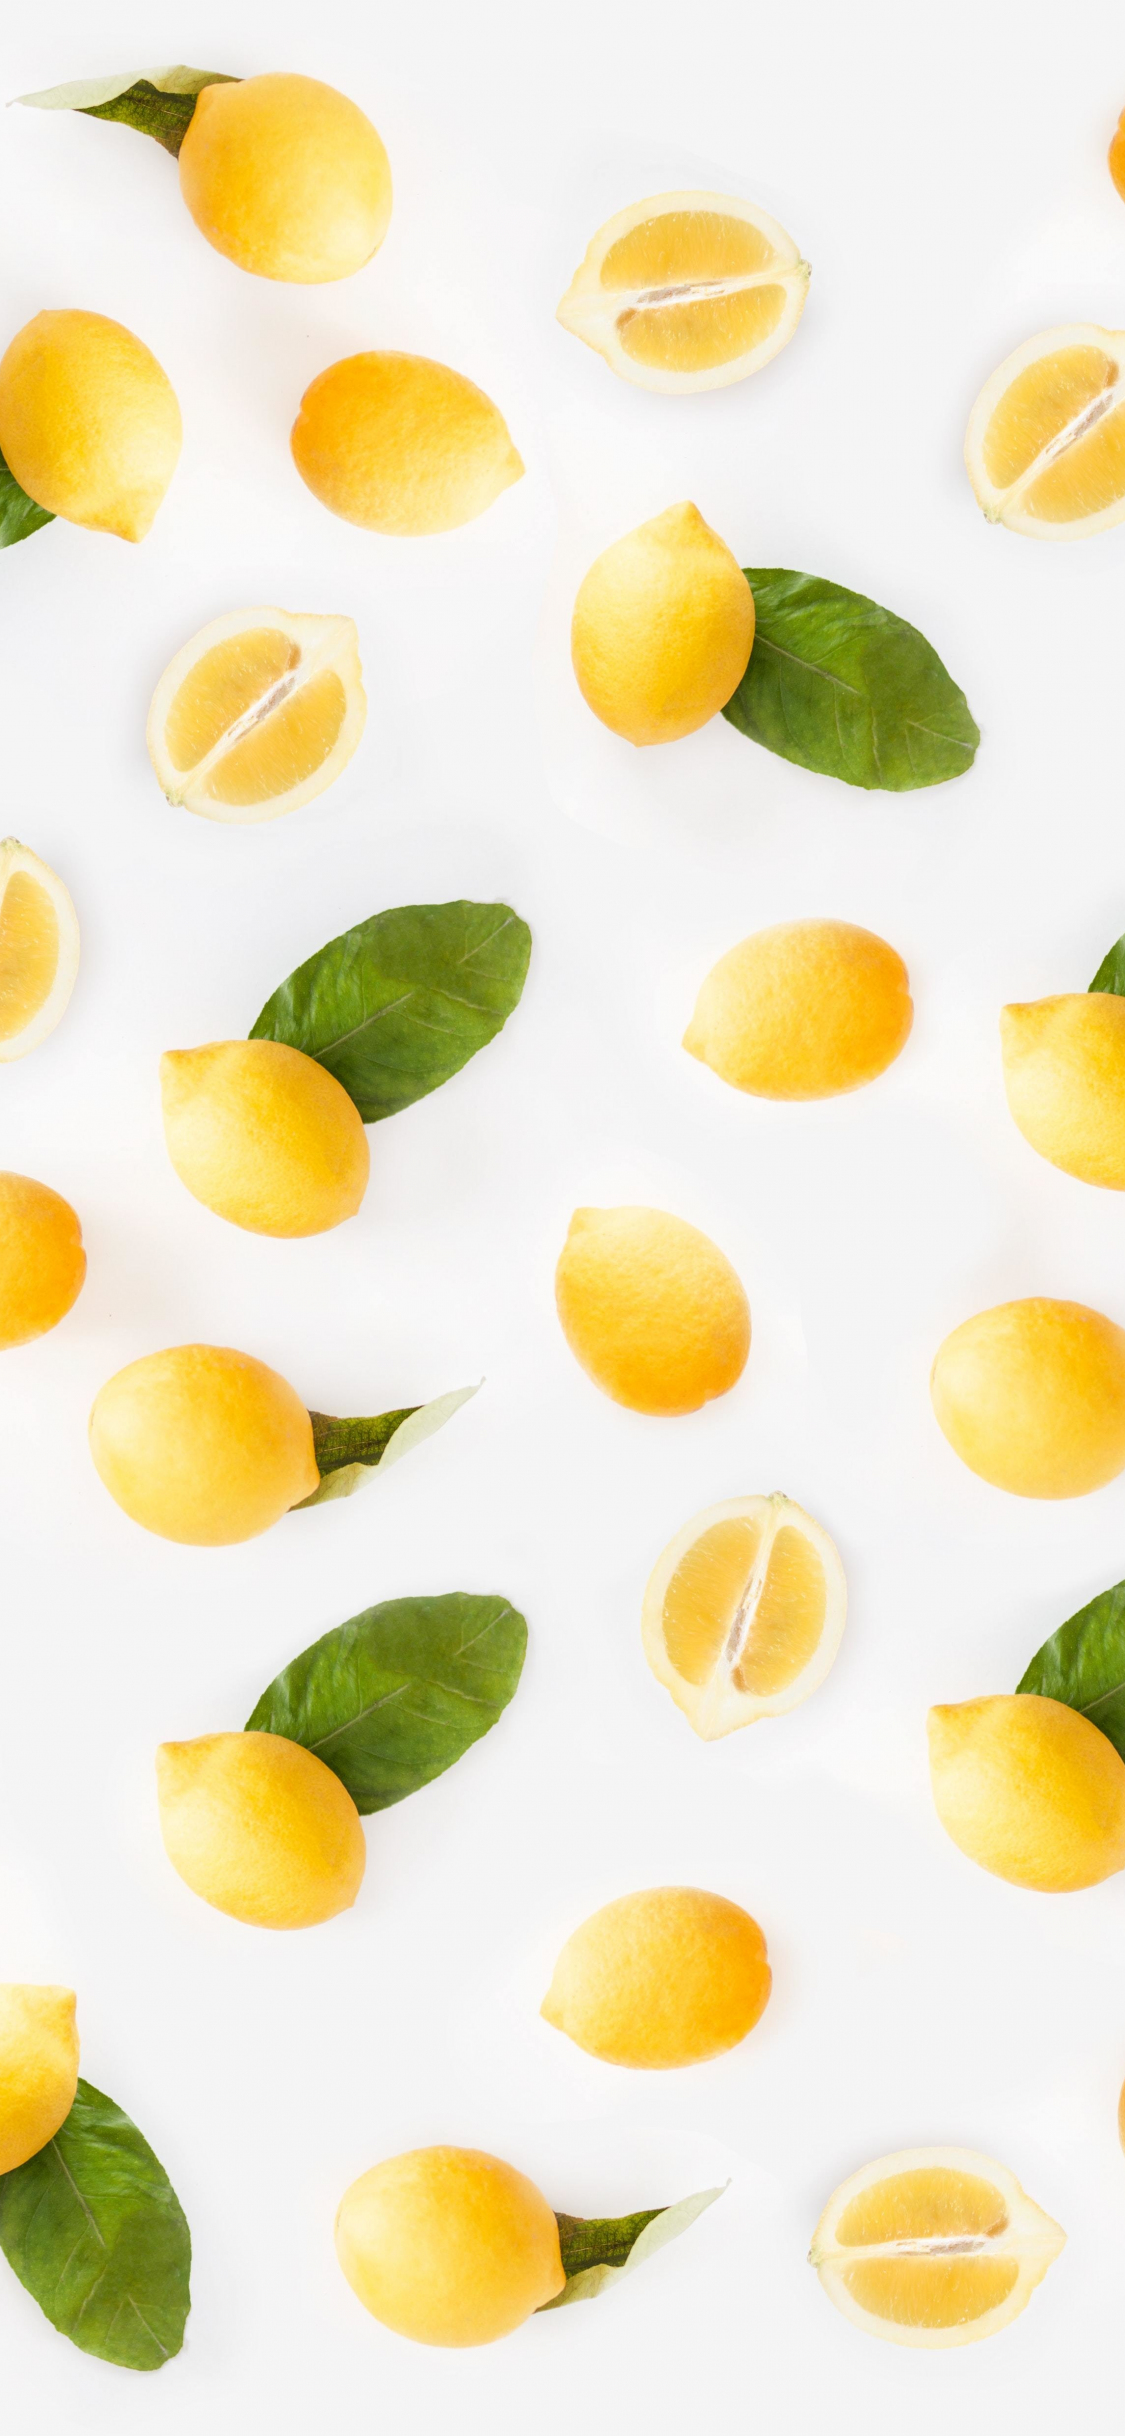 Pattern of whole and sliced lemons with leaves on a white background - Fruit